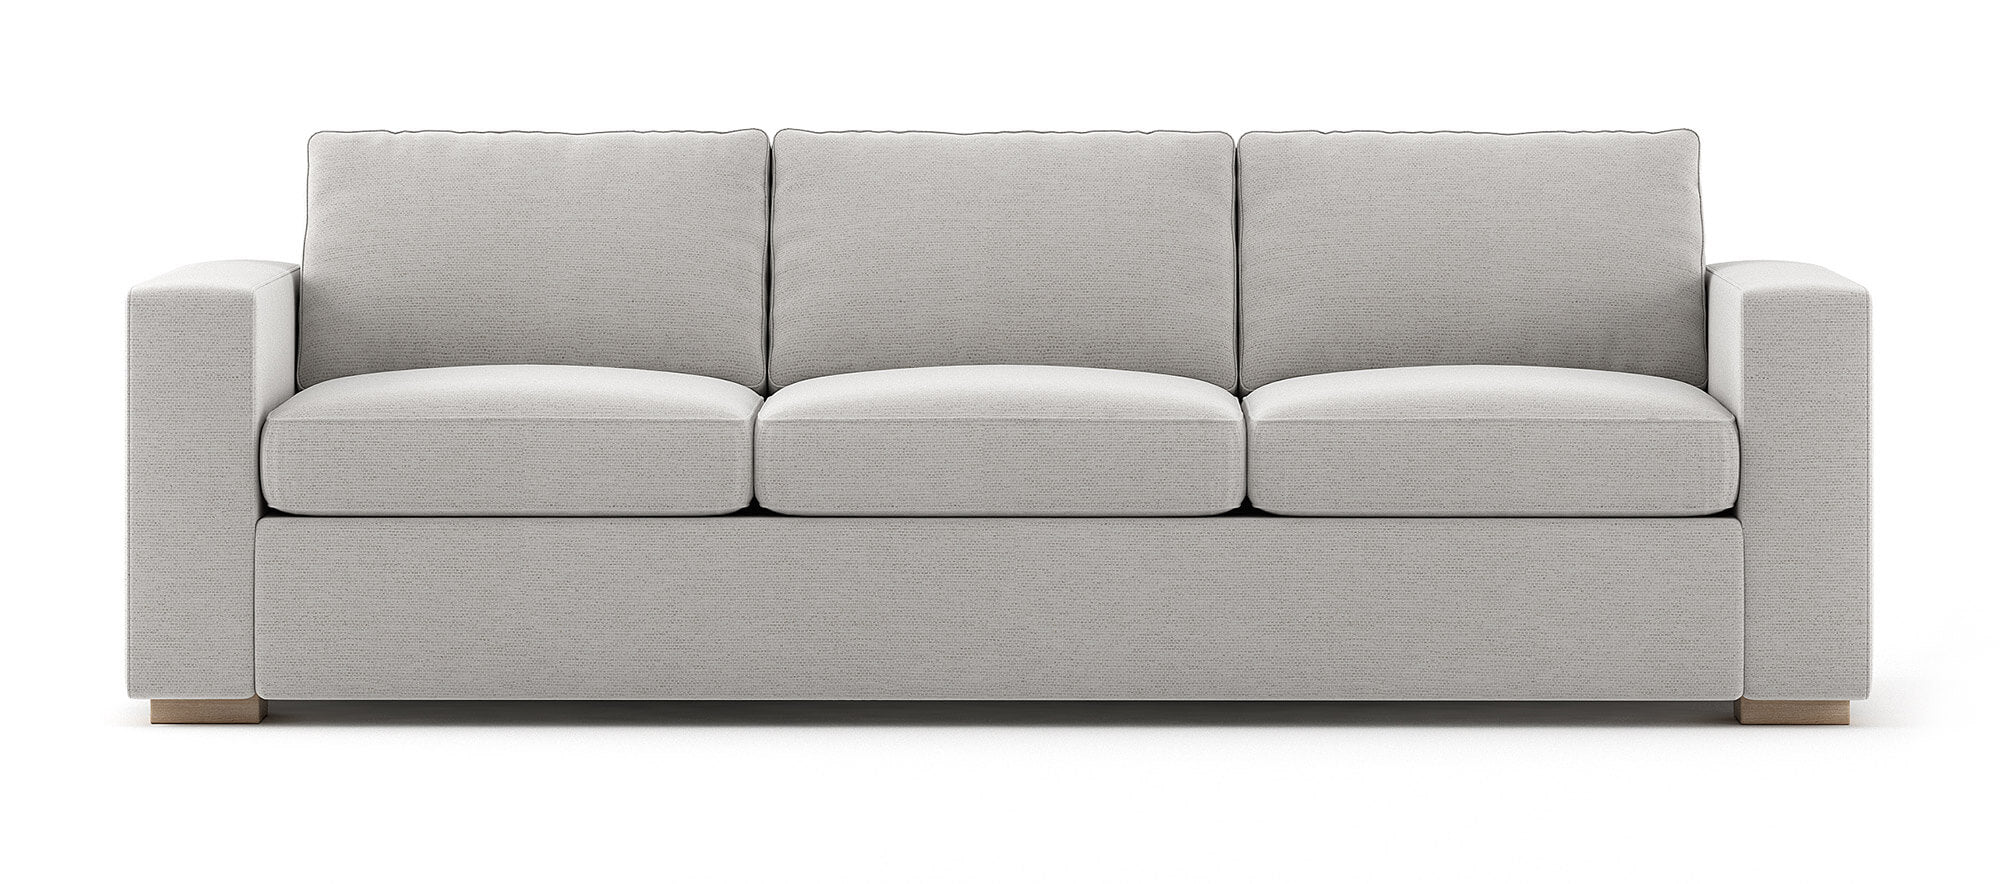 3 Seat Sofa with Removable Back and Seat Cushions - Cream